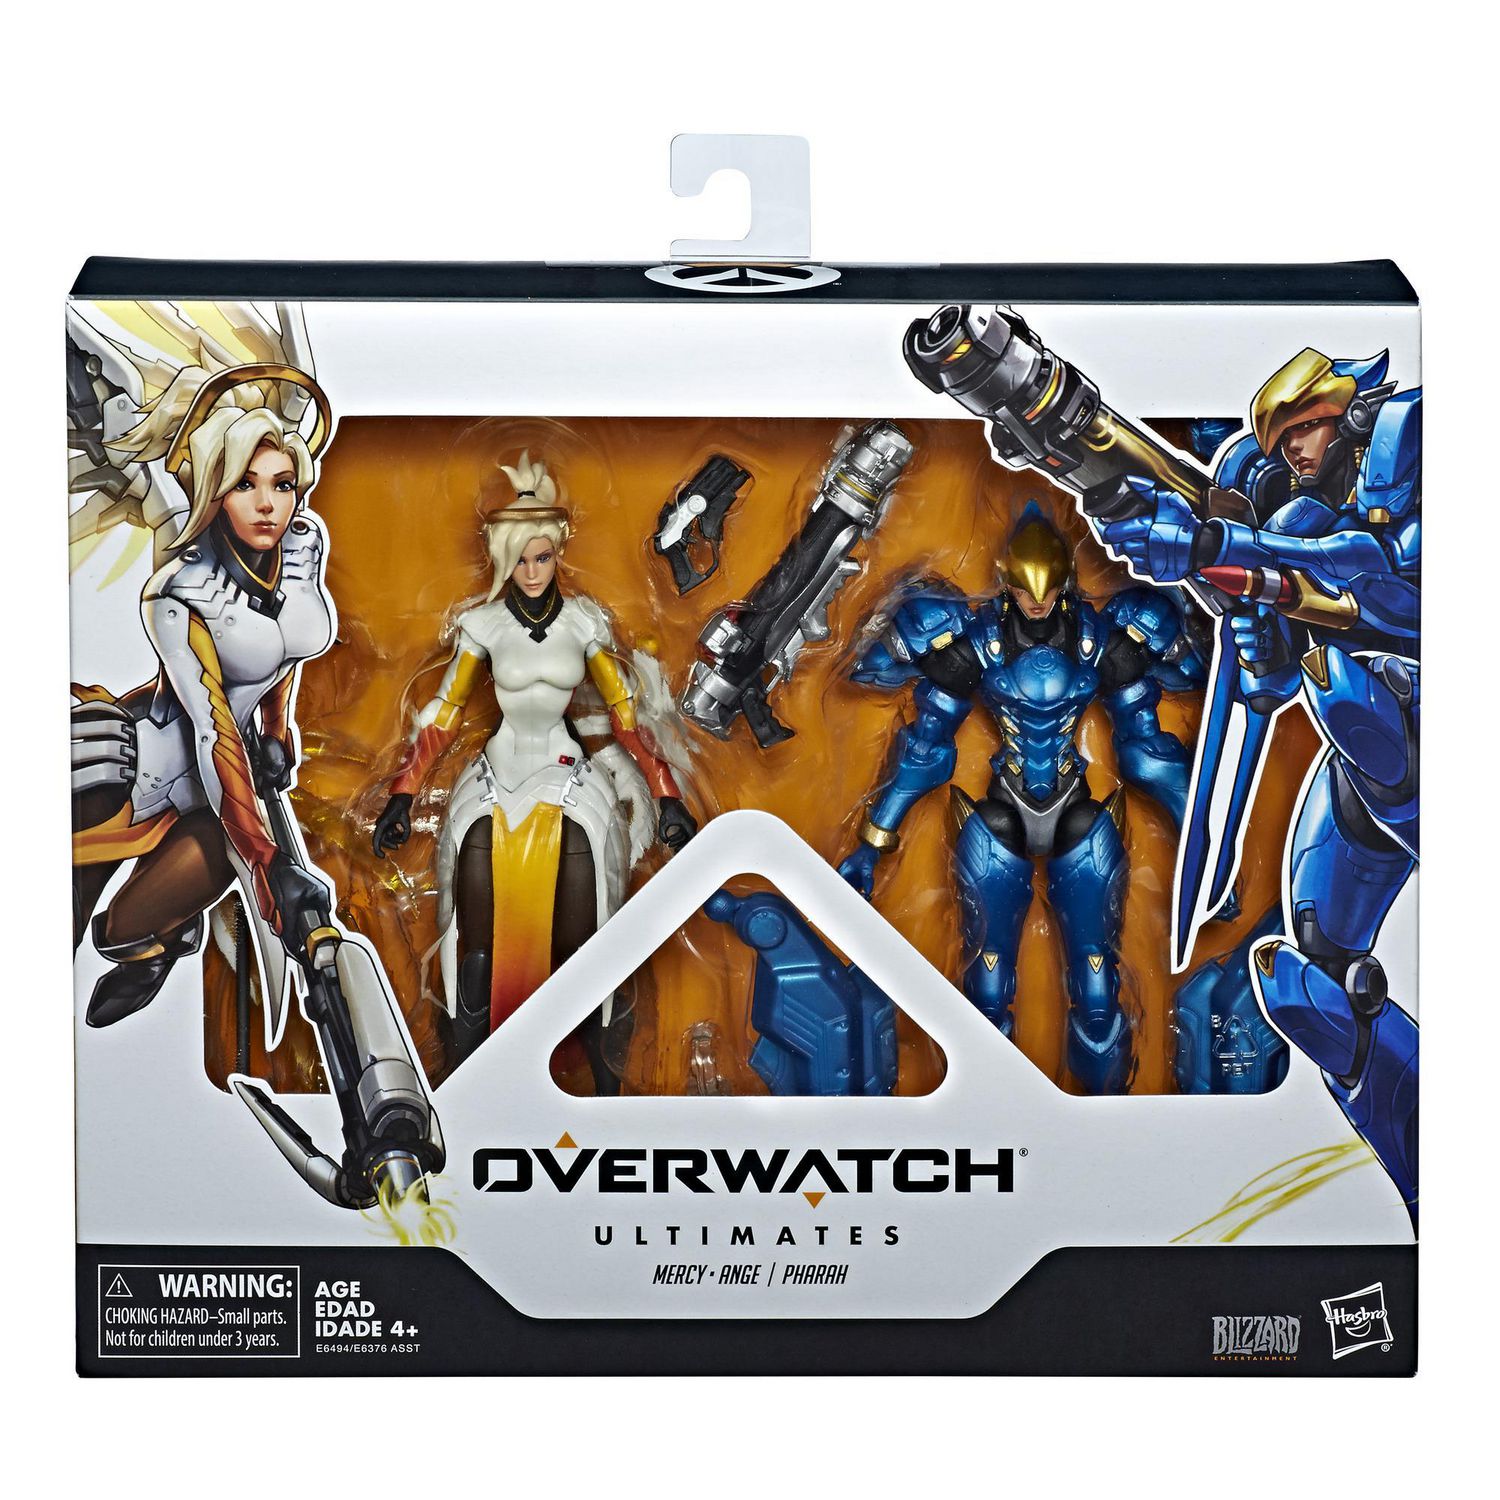 Blizzard Overwatch Ultimates Soldier 76 Loose 6/" Action Figure Hasbro 2019